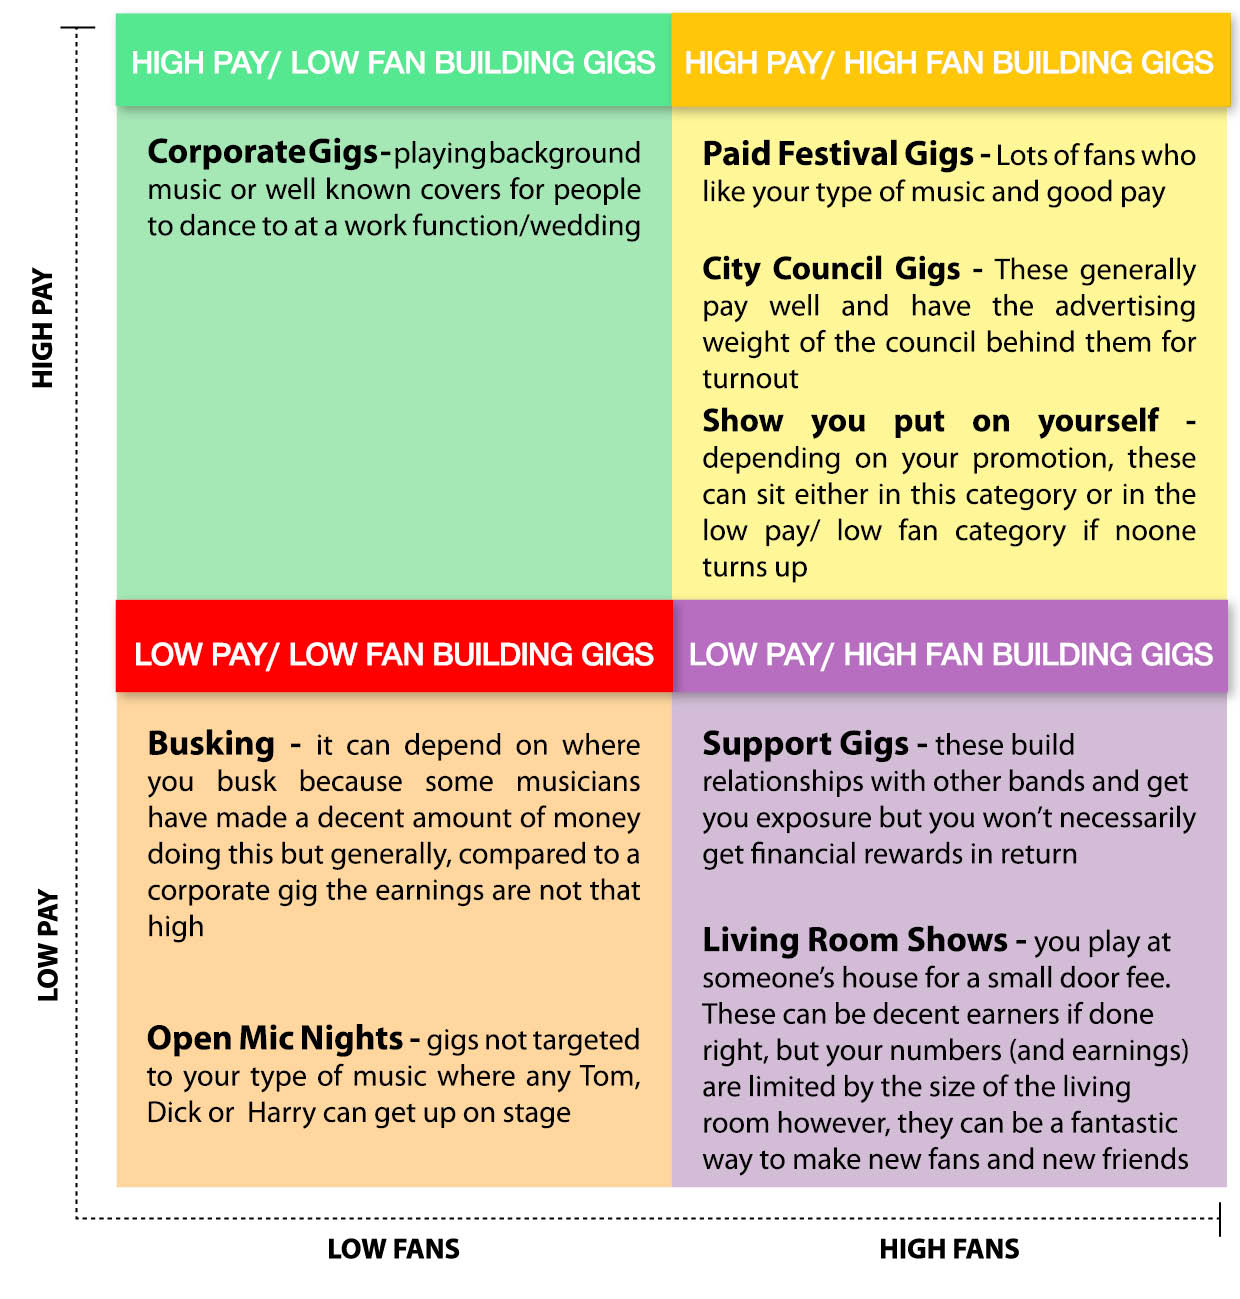 The Gig Matrix, which defines which gigs pay well versus gigs that help build audiences.